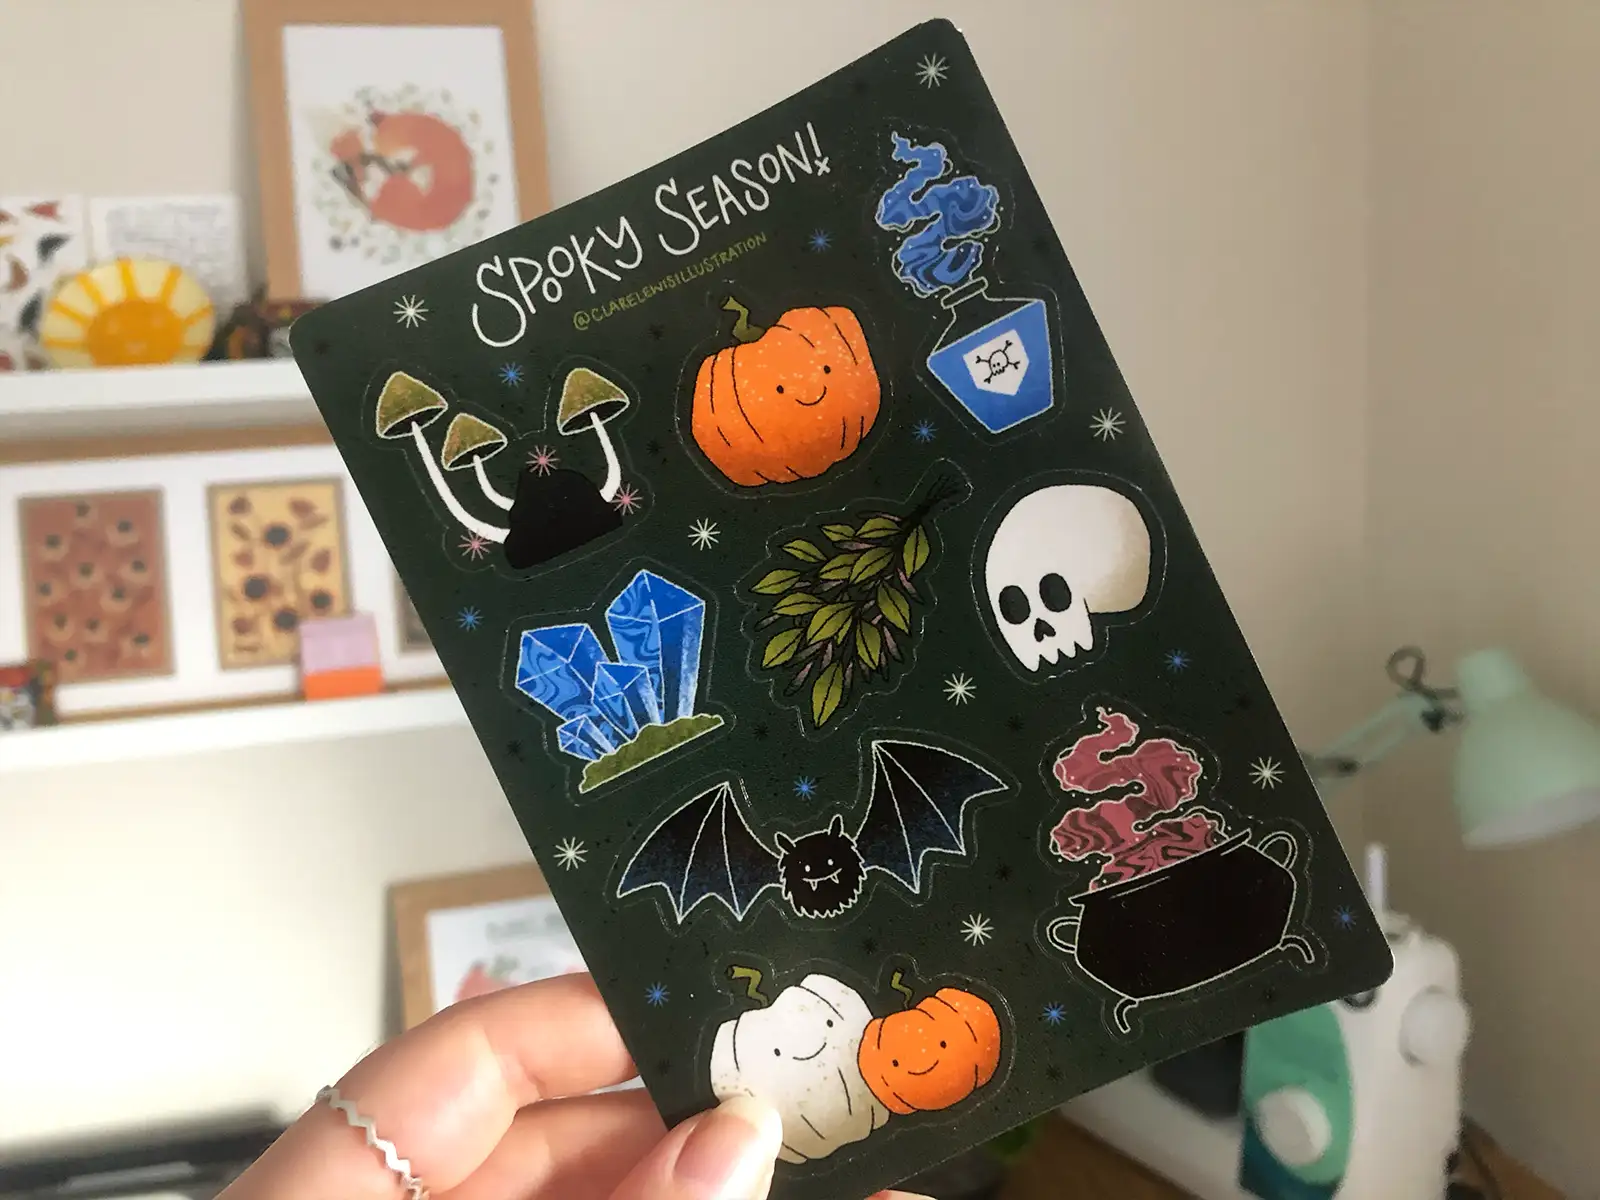 Spooky season sticker sheet includes 9 halloween themed stickers on a transparent gloss